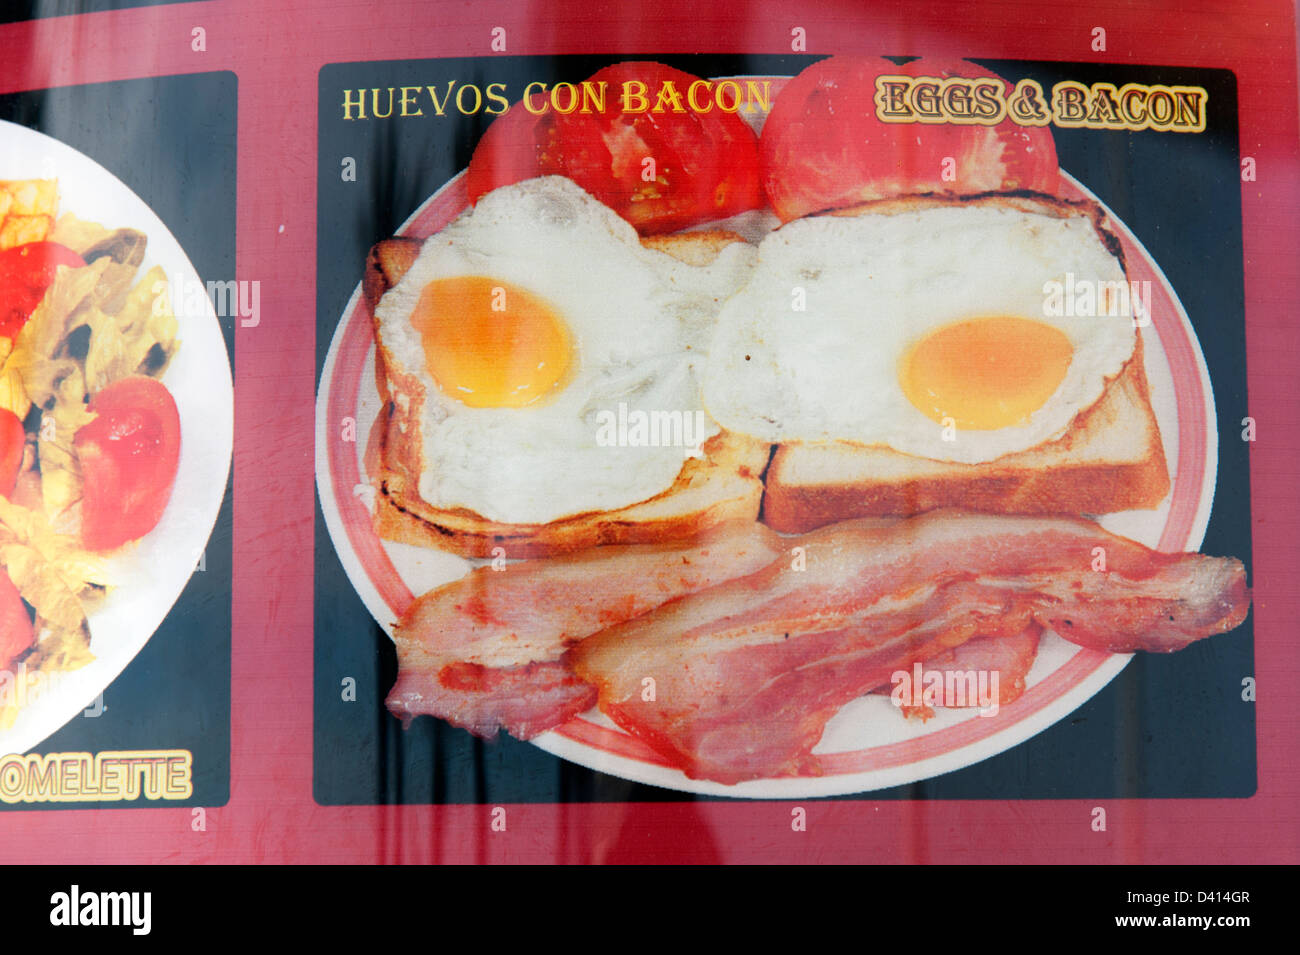 English food of bacon and eggs pictured on cafe menu, Benidorm, Costa Blanca, Spain Stock Photo